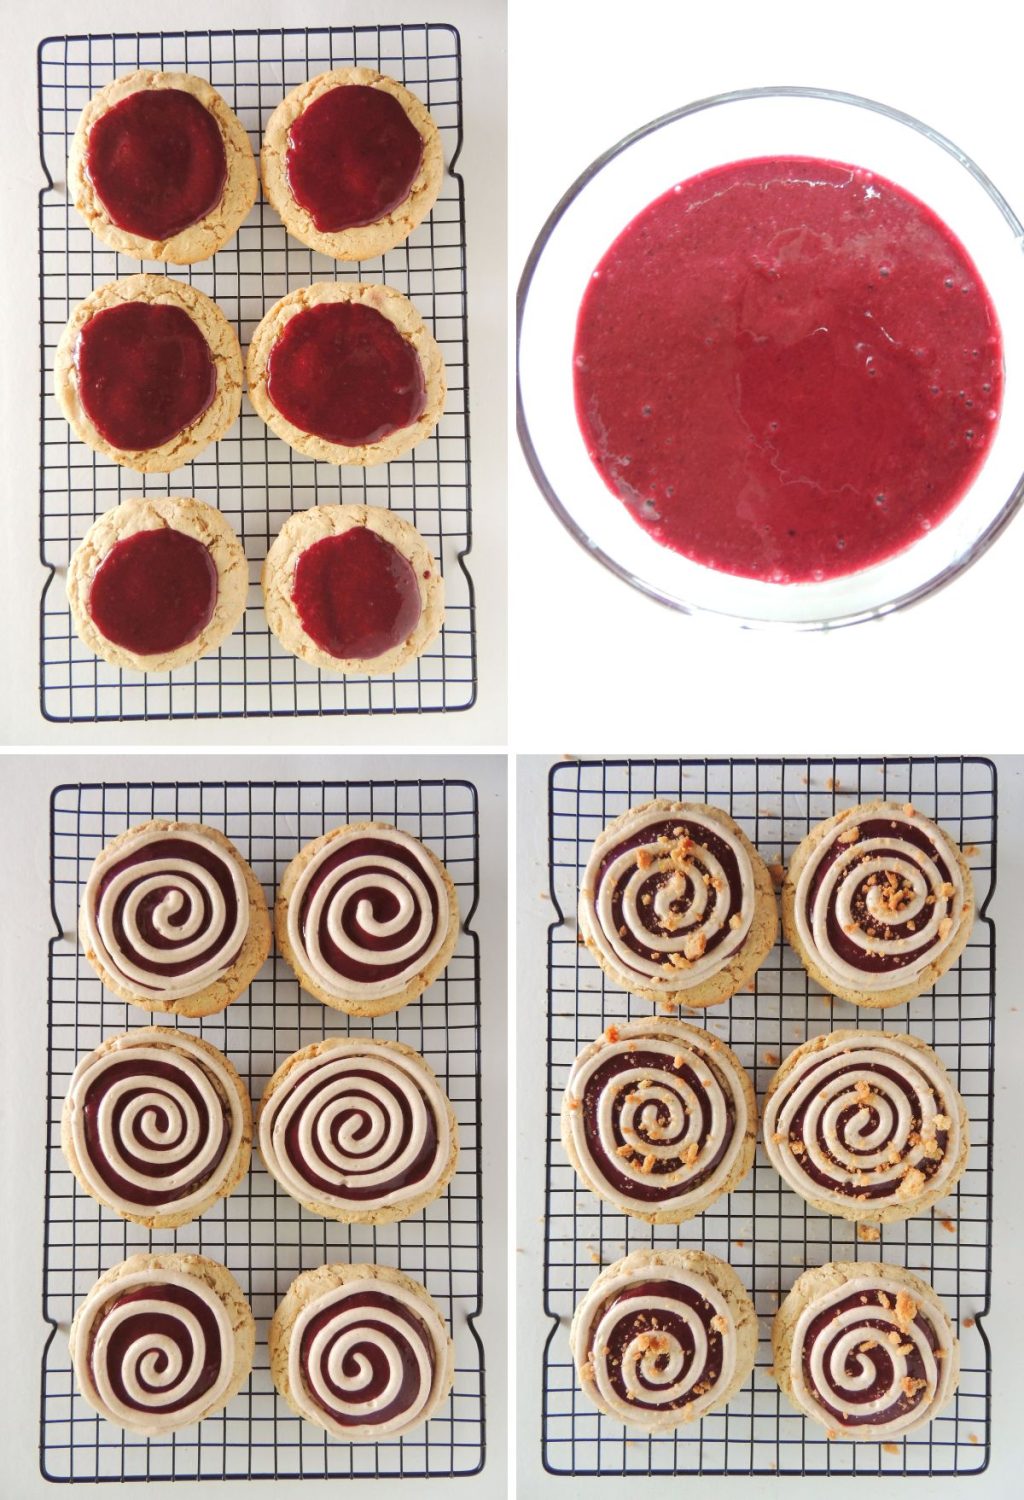 A series of photos showing how to make raspberry swirl cookies.